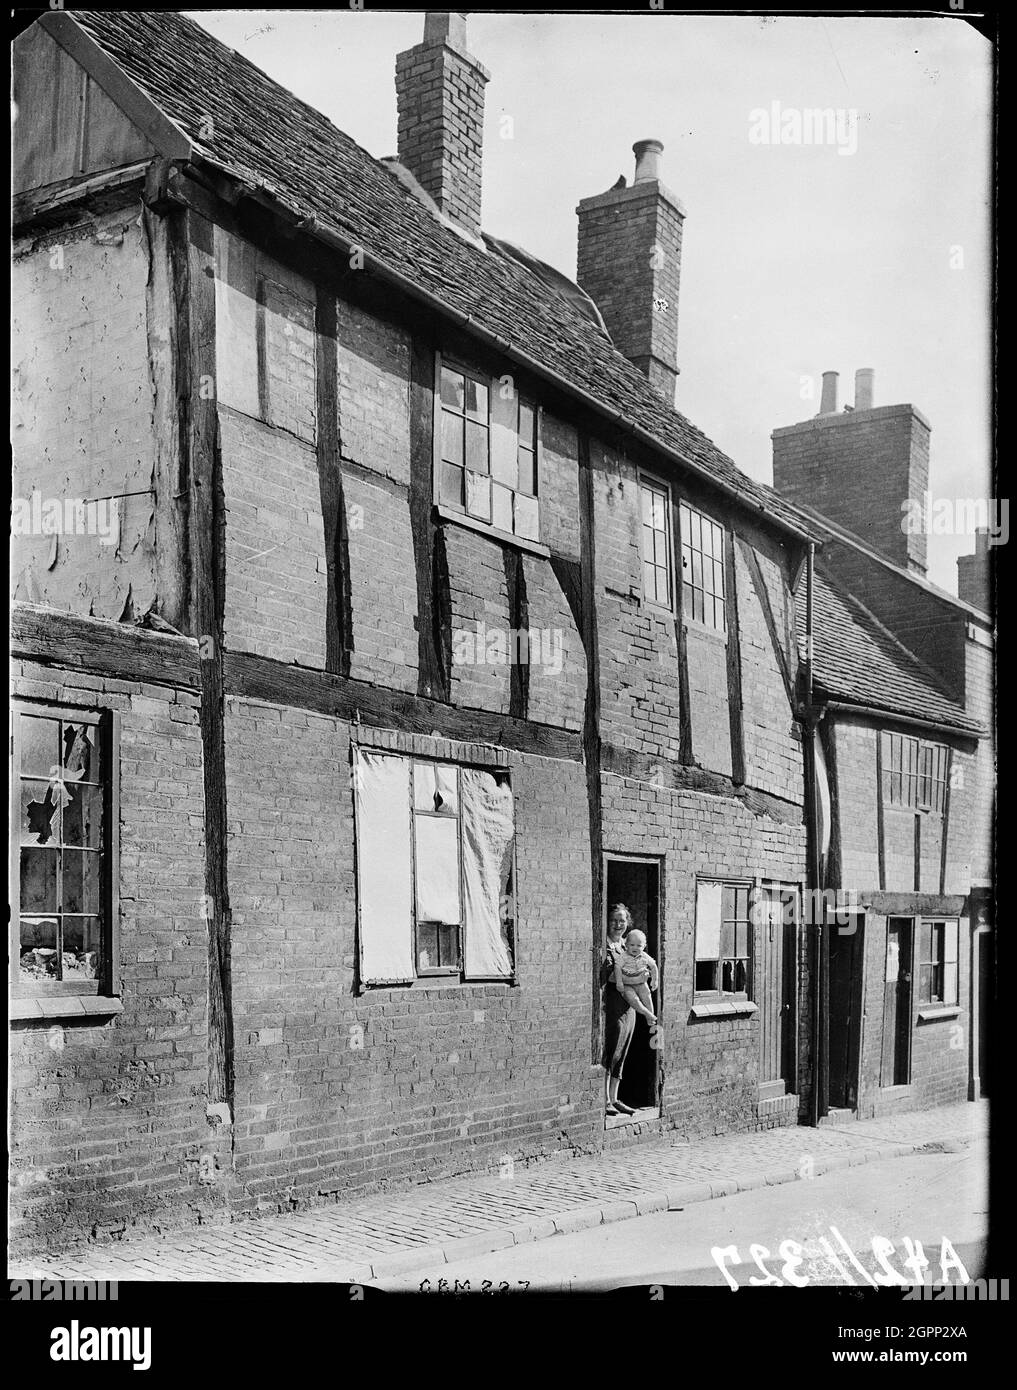 New Street, Coventry, 1941. The exterior of 30 New Street with a woman standing in the doorway of the house holding a baby and the windows boarded as a result of bomb damageA note beneath the photograph reports that the baby was &quot;born during the great air-raid&quot;. Coventry City centre was devastated by air raids in November 1940. The bombing left the nearby cathedral in ruins and destroyed much of the historic fabric of the city. New Street was demolished following the end of the war. Stock Photo